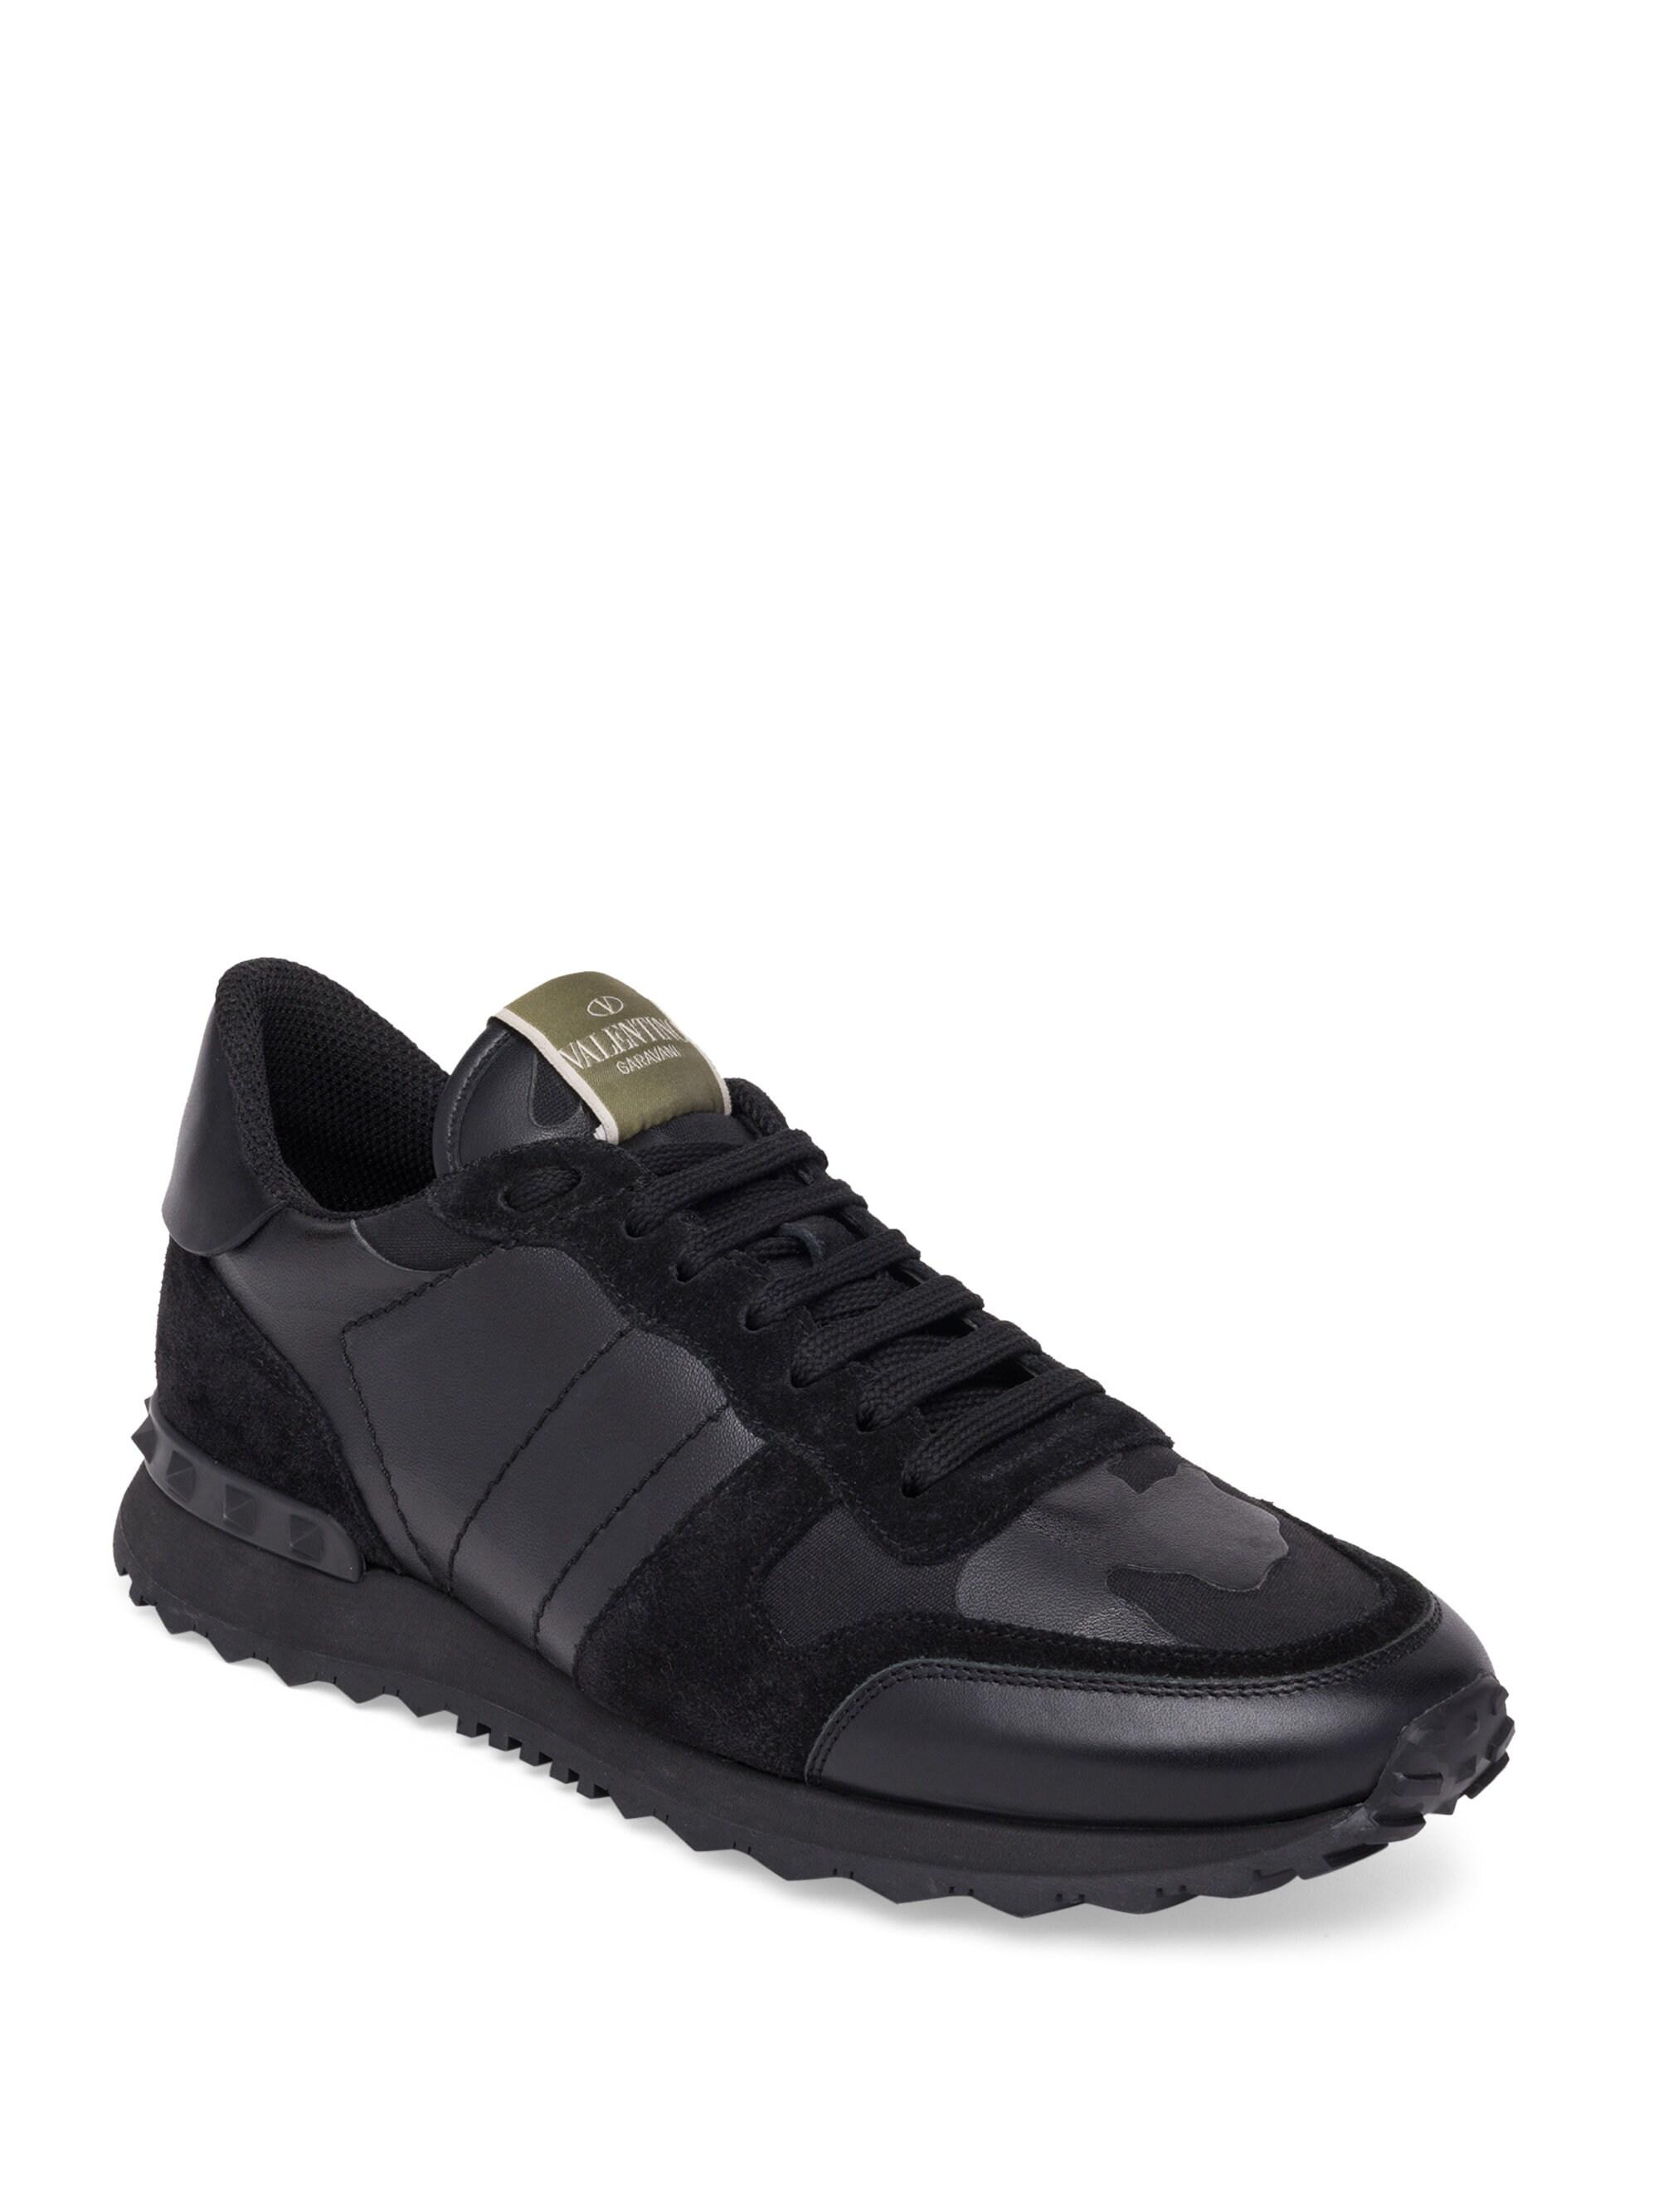 Valentino Leather Noir Rockrunner Camouflage Sneakers in Black for Men -  Lyst